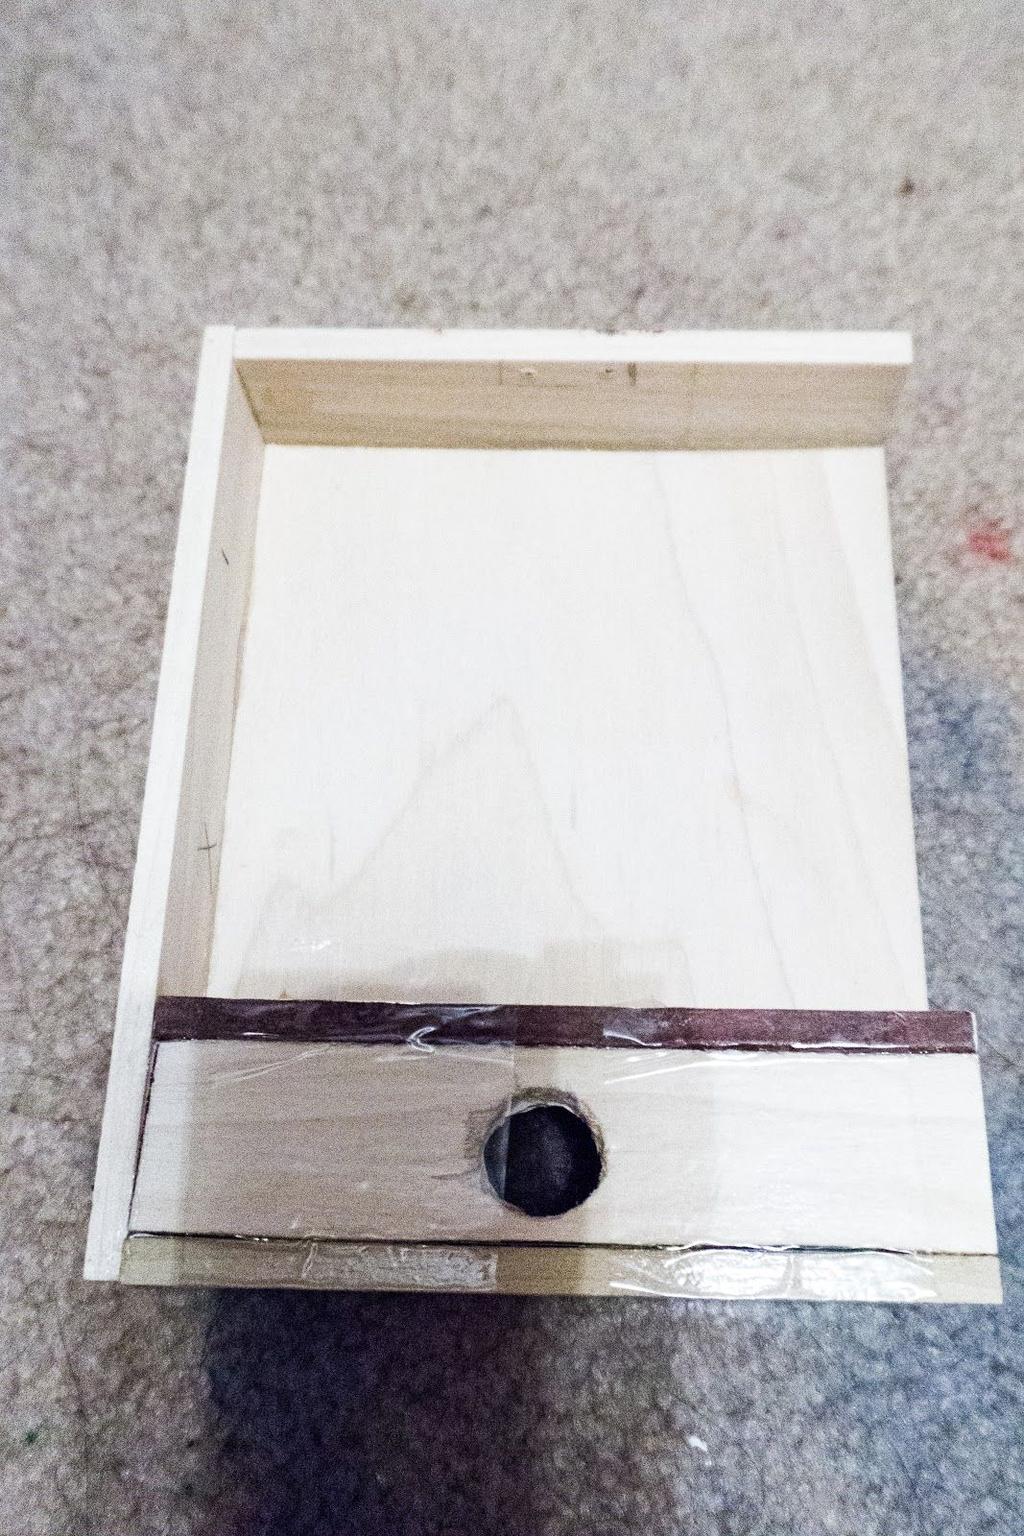 Use the E6000 glue to attach (3) short wall wood pieces, (1) long wall piece, the wood piece with the lock, and the 5.25 inches x 1.